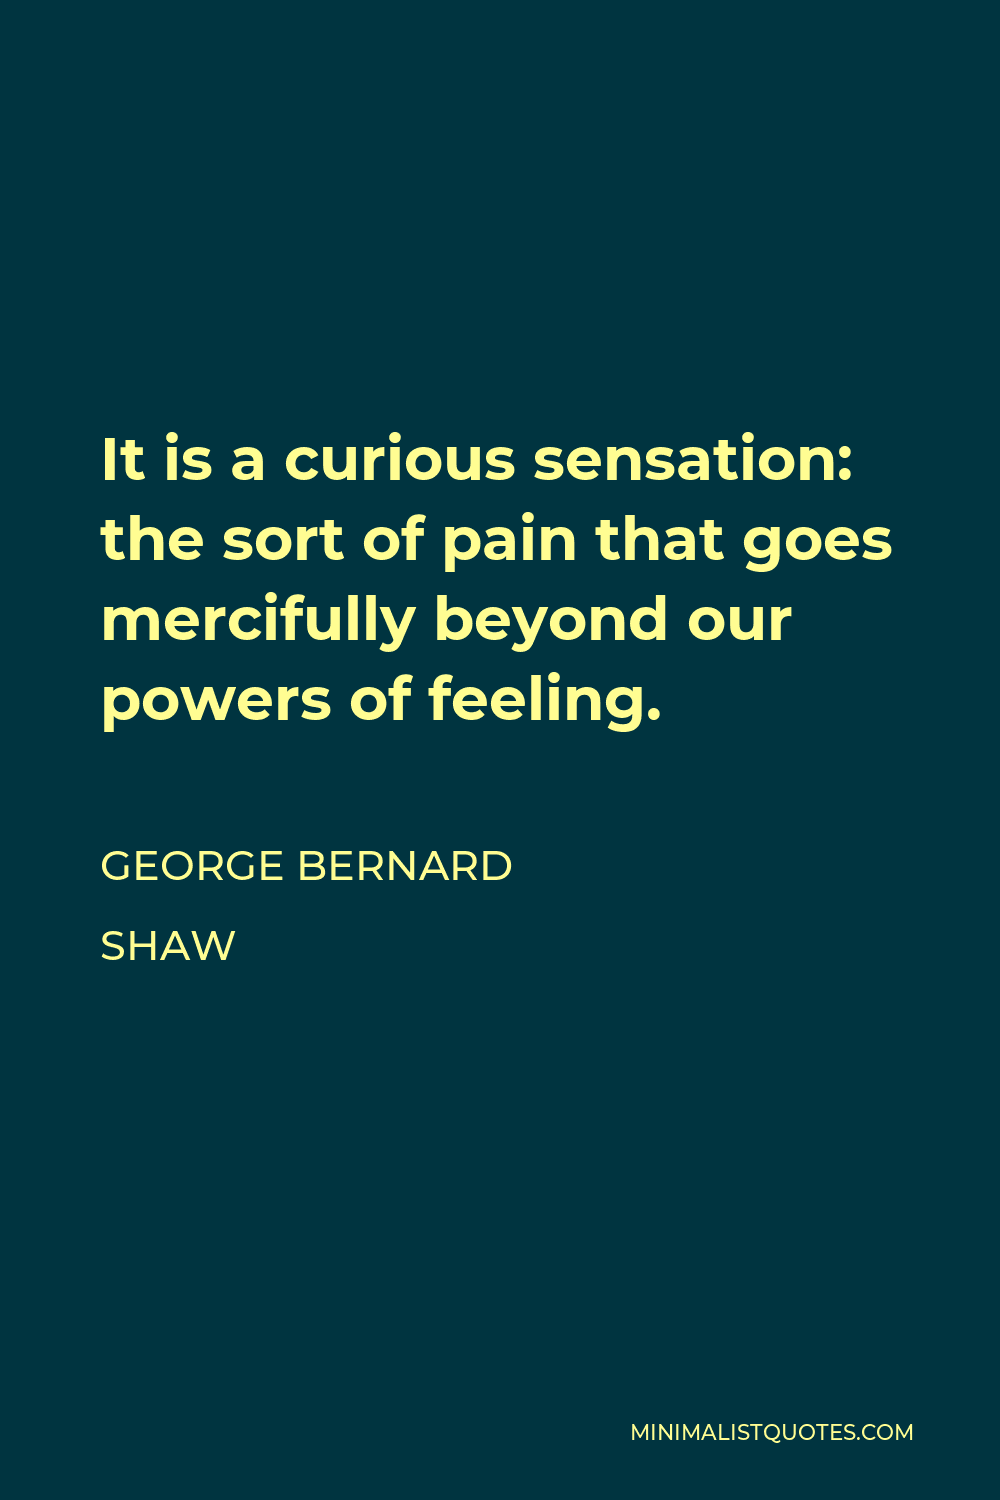 George Bernard Shaw Quote - It is a curious sensation: the sort of pain that goes mercifully beyond our powers of feeling.